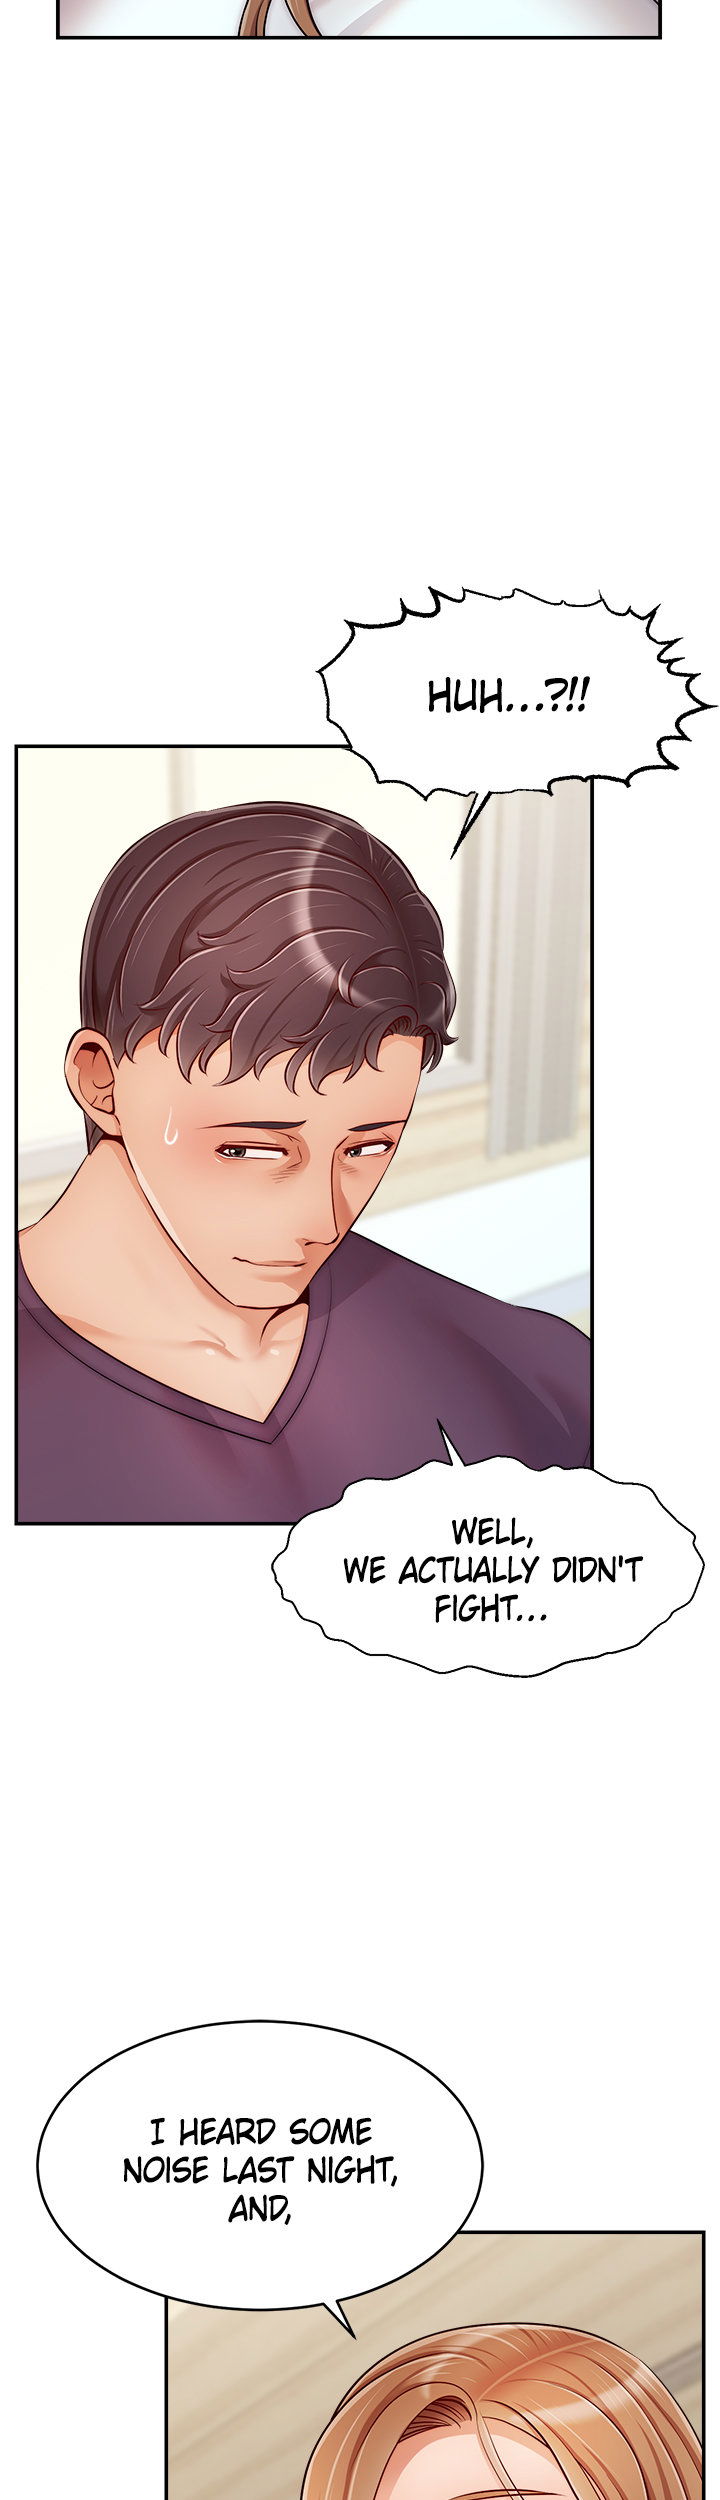 its-okay-because-were-family-chap-37-37